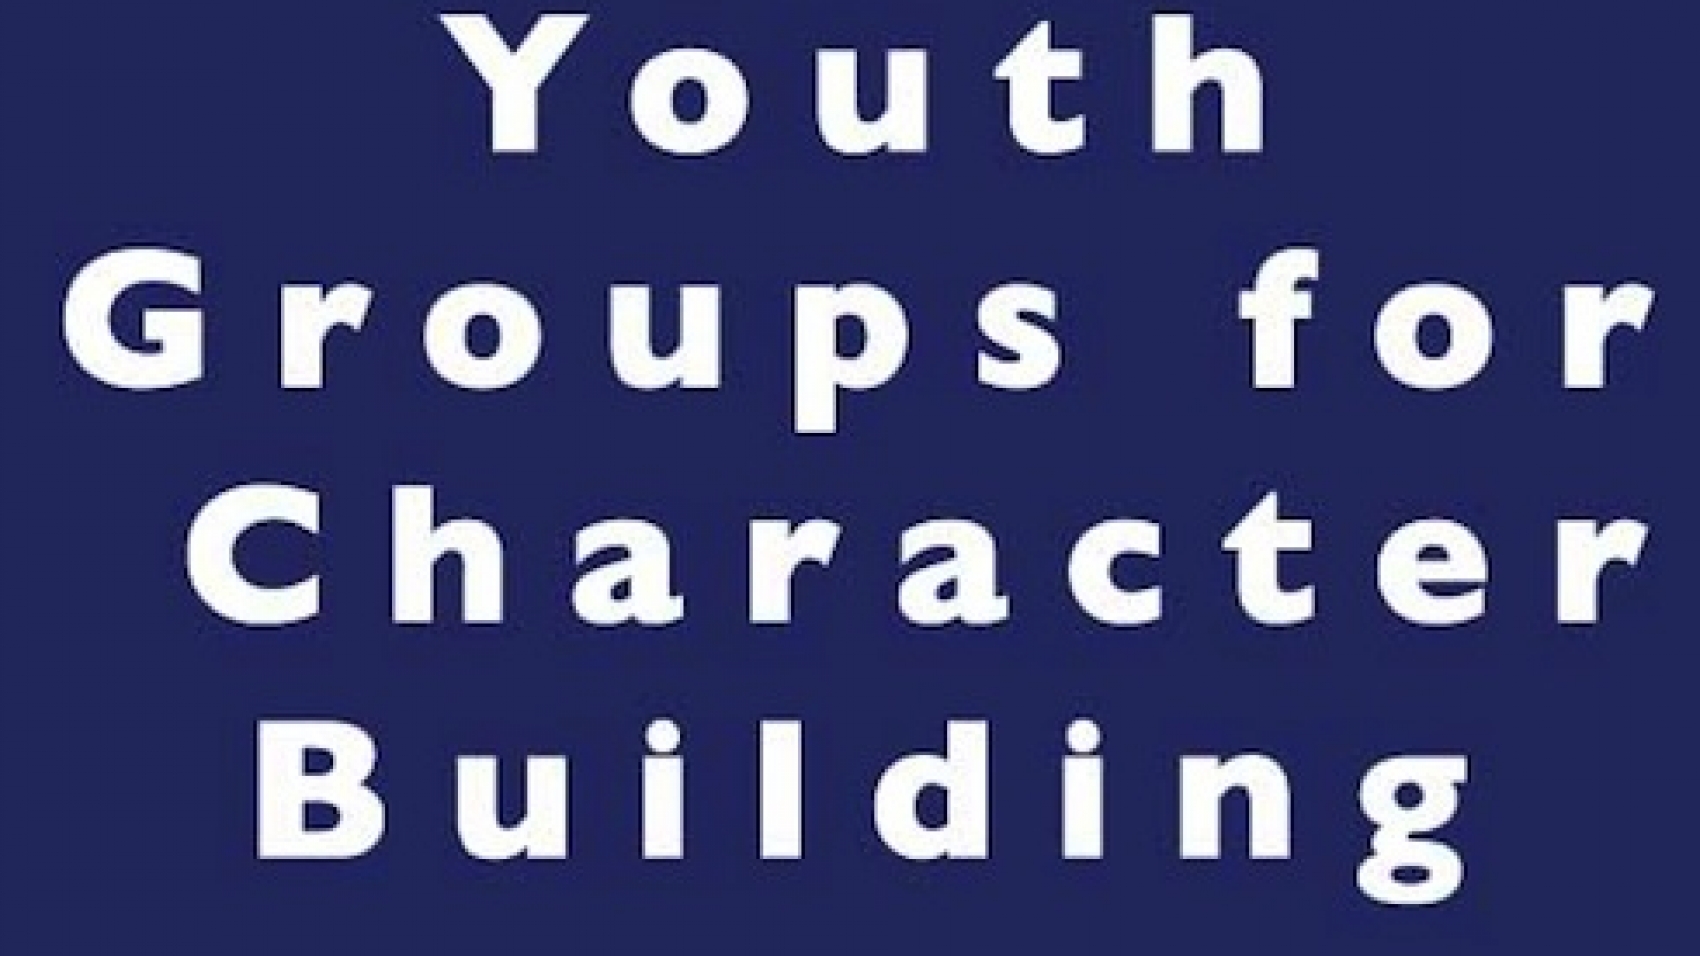 Jewish youth groups for Character Building